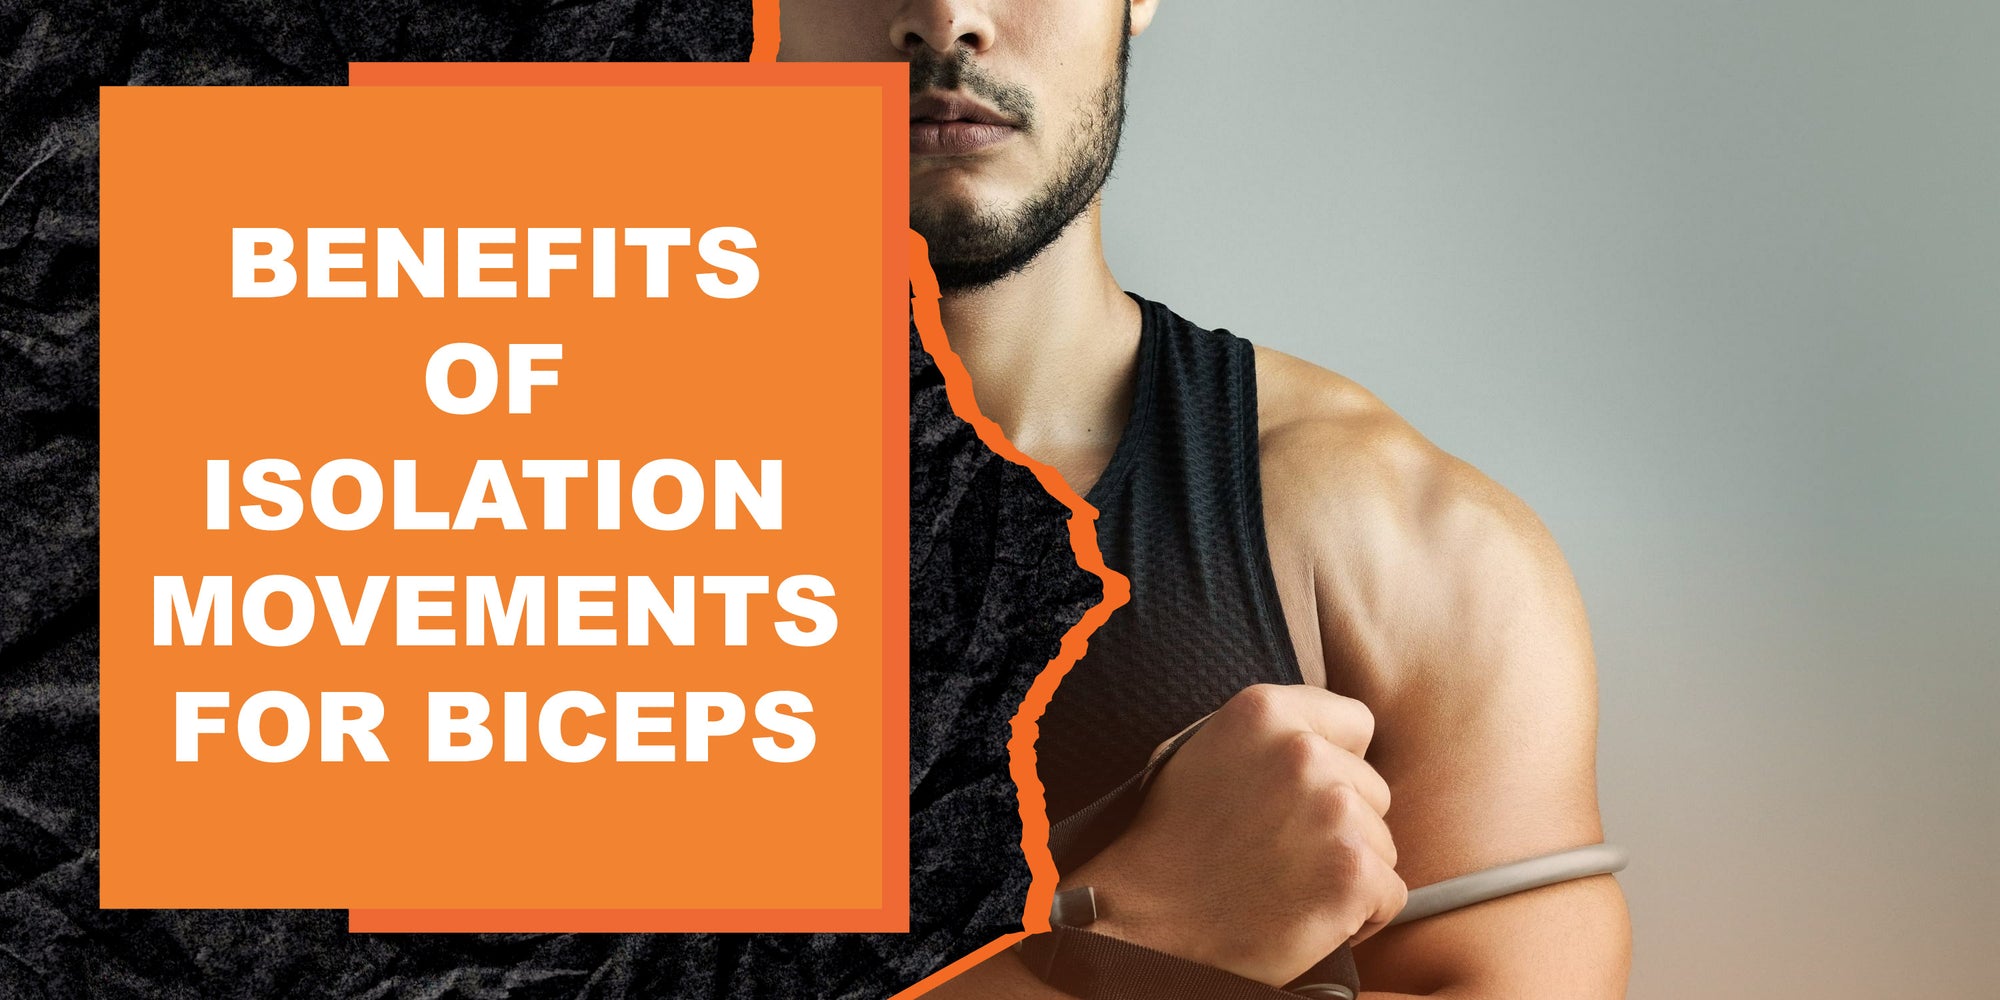 The Benefits of Isolation Movements for Bicep Development